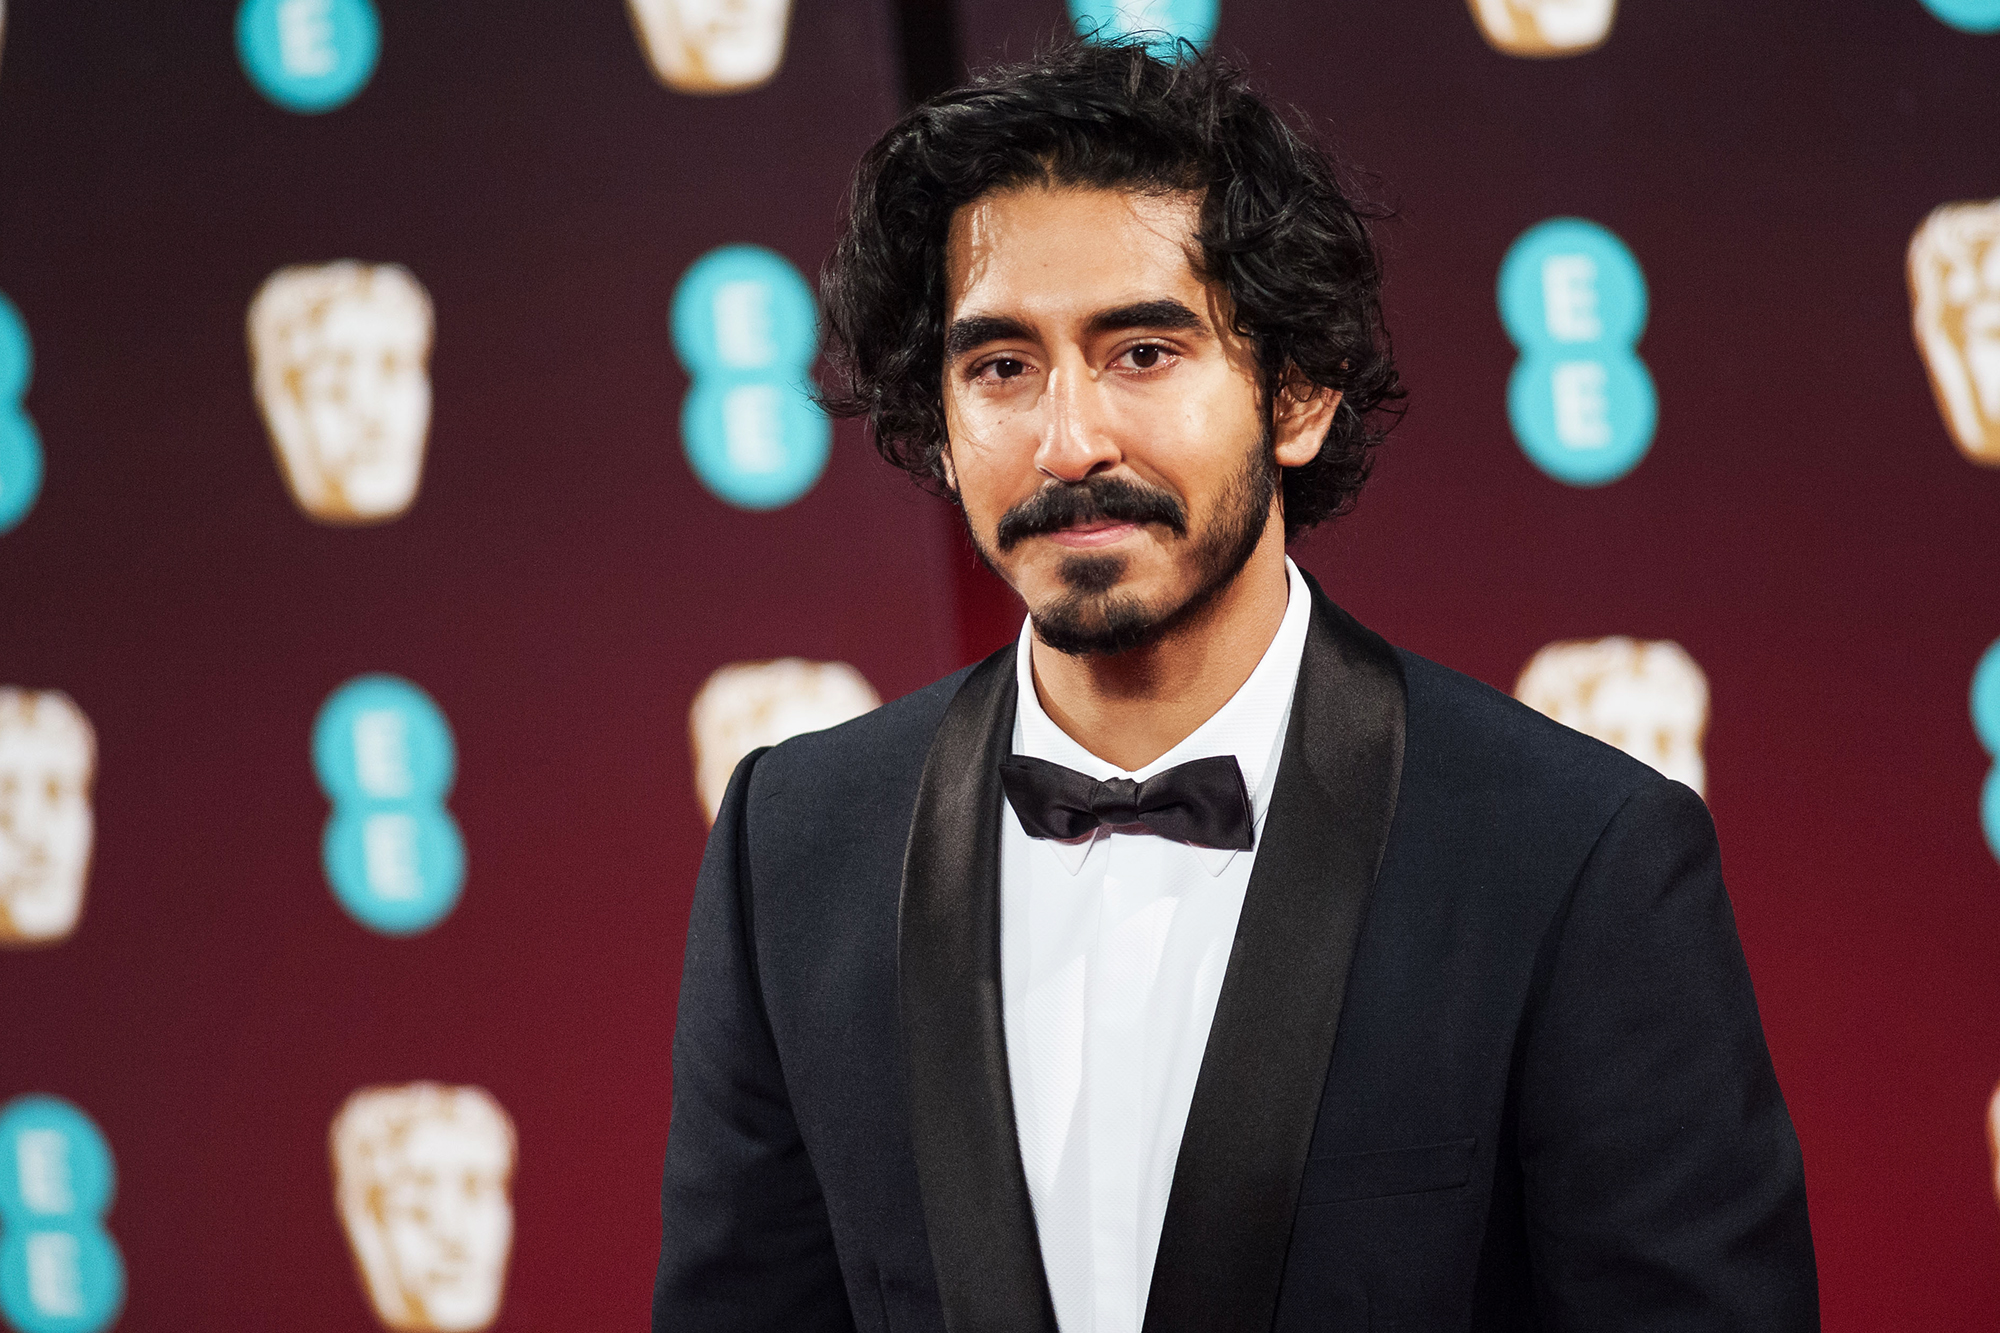 Dev Patel attends the 70th British Academy Film Awards ceremony at the Royal Albert Hall, on Feb. 12, 2017 in London. (Wiktor Szymanowicz—Getty Images)